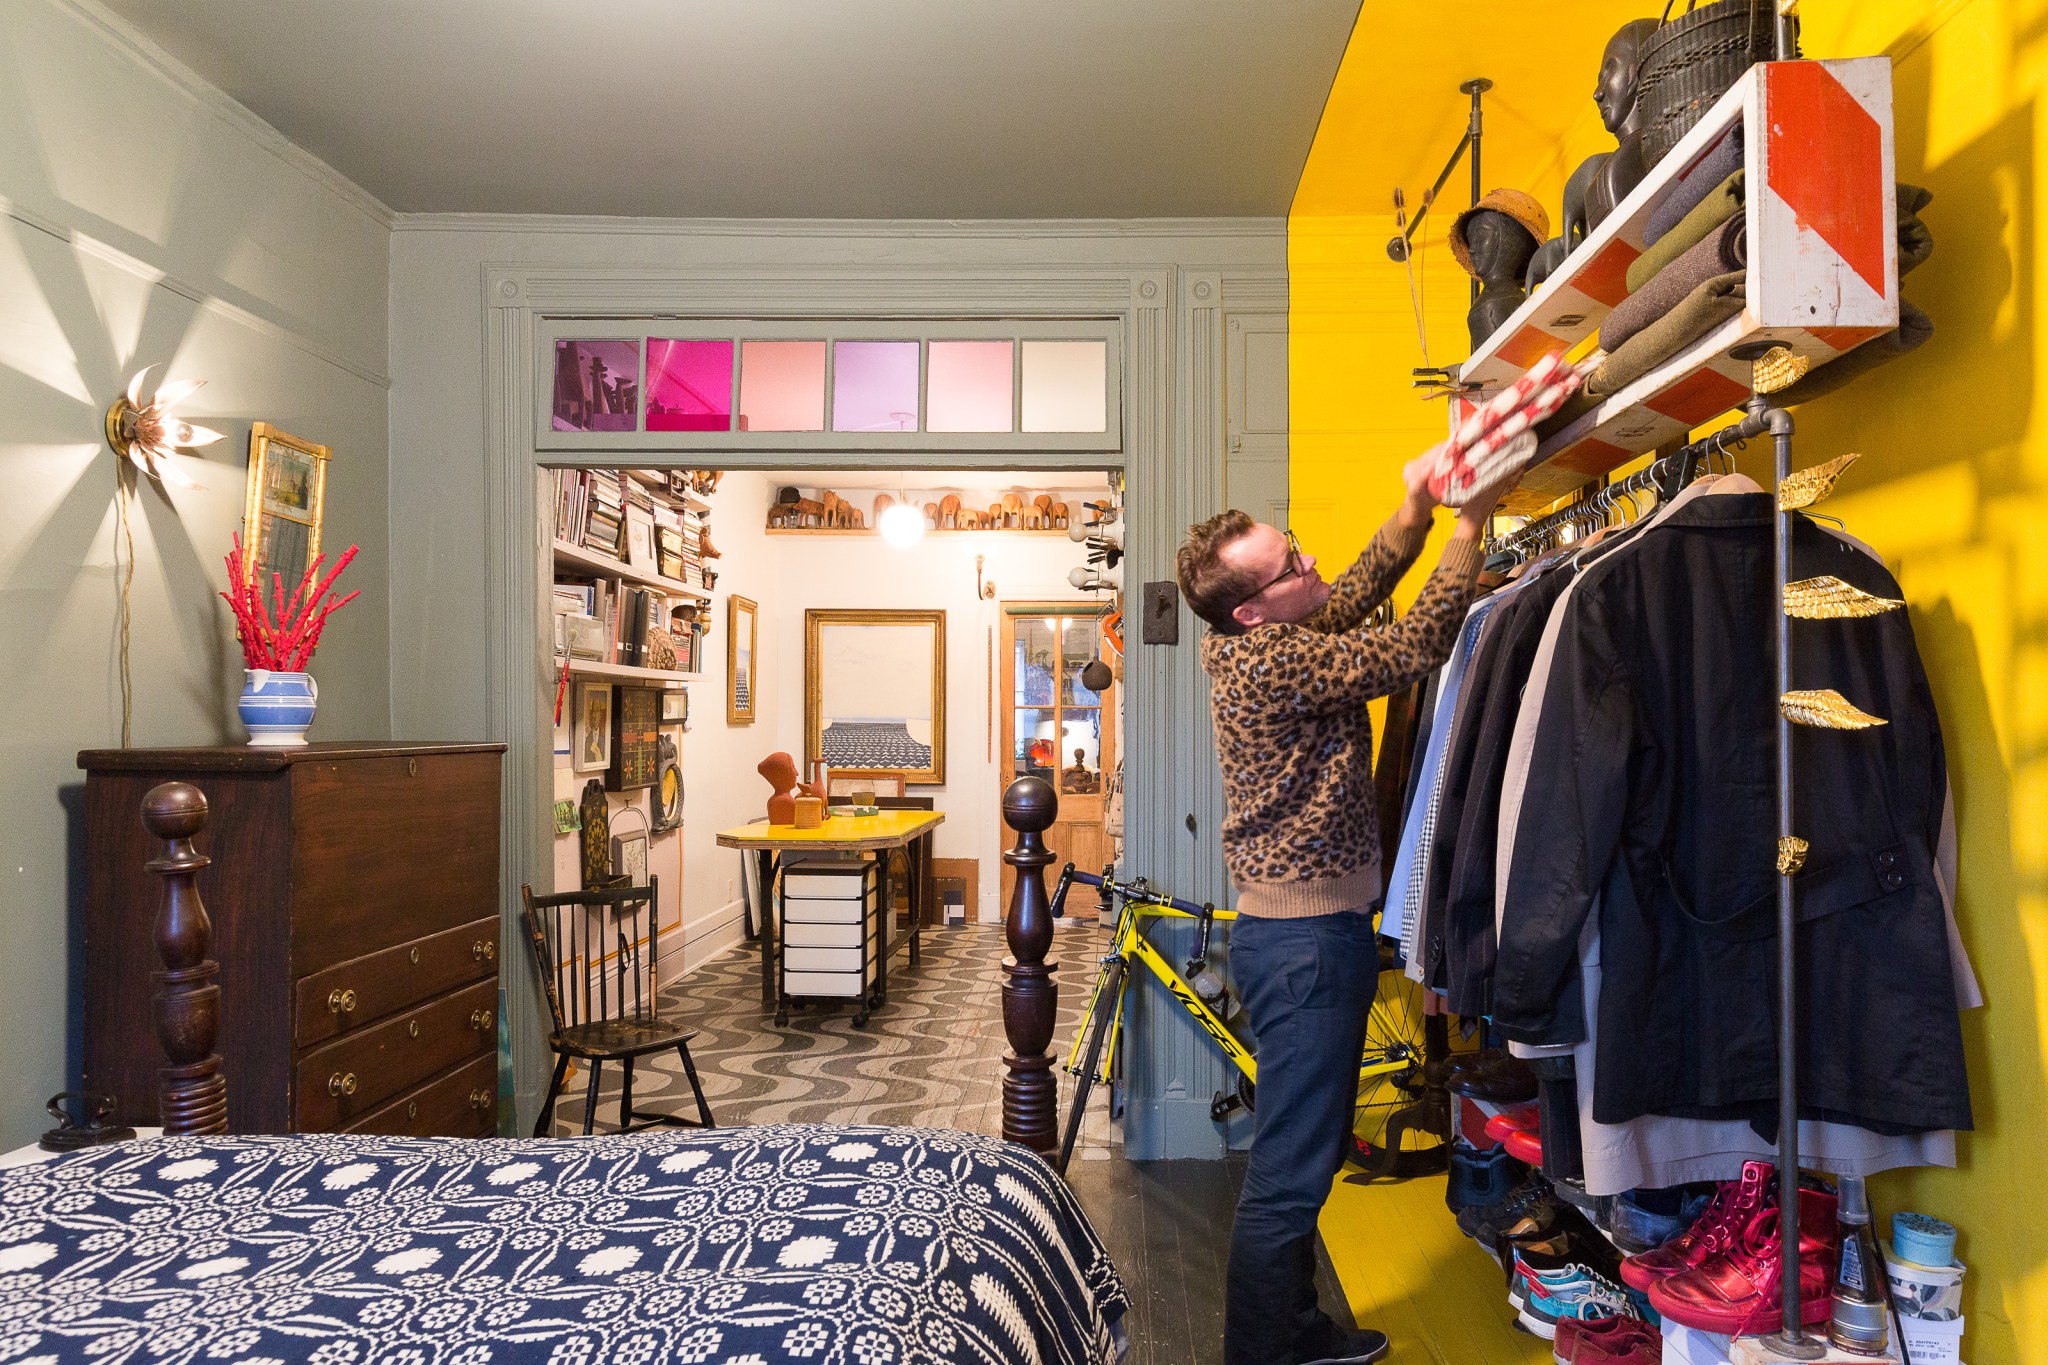 How to Organize Every Room of the House with Storage Bins